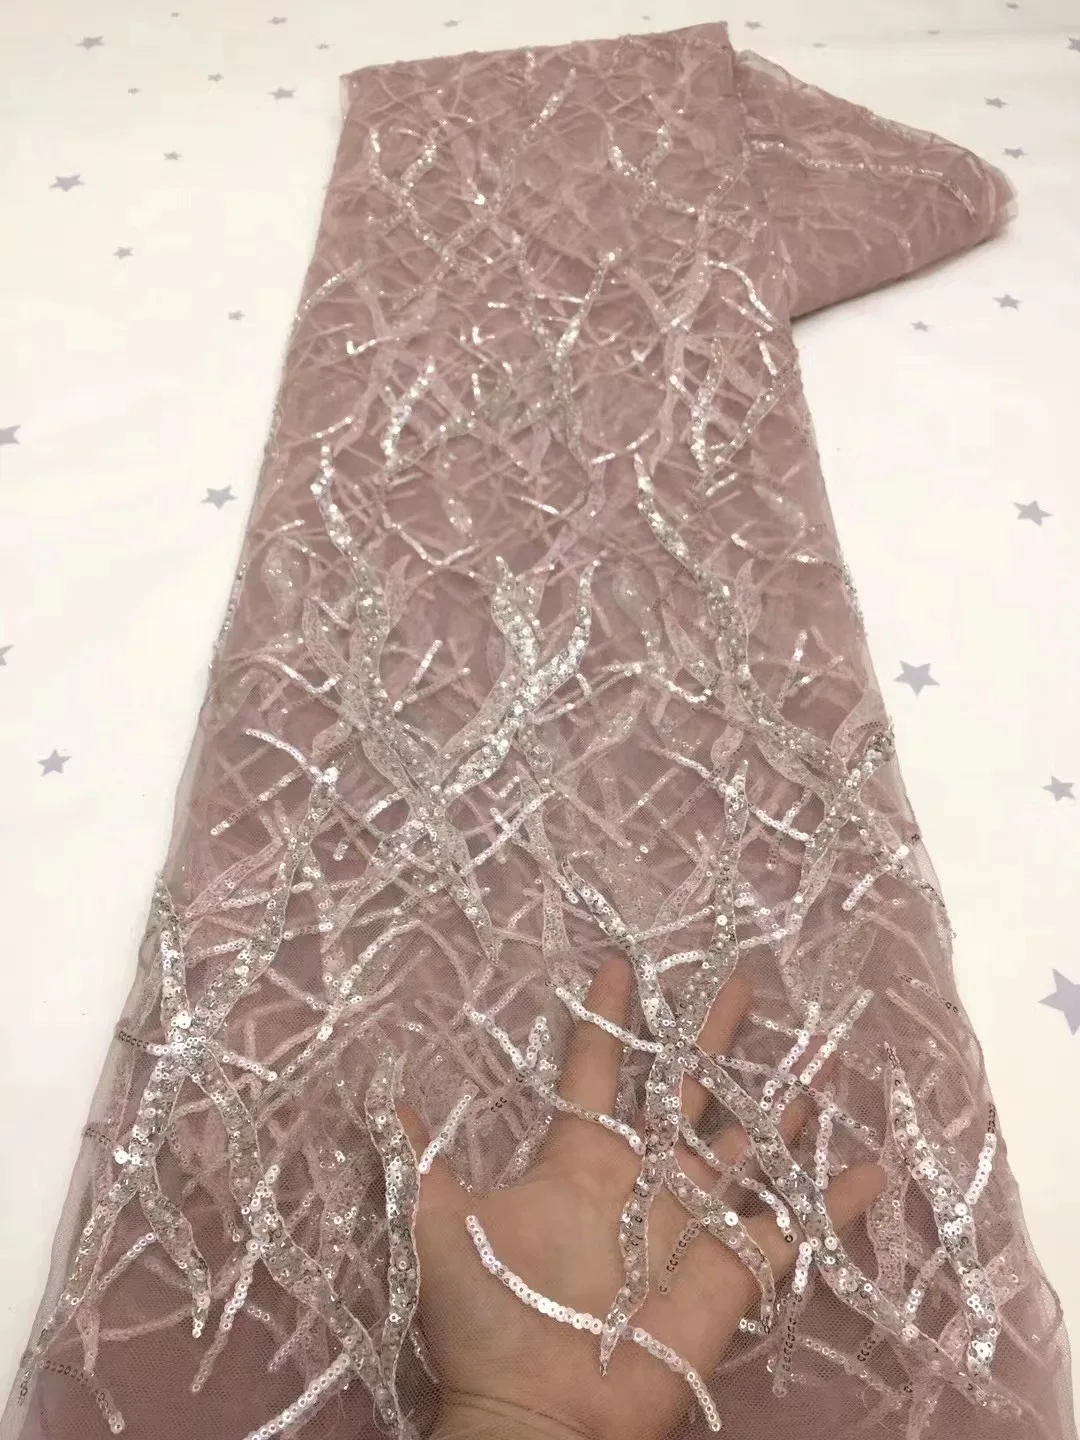 

Pink Bling Sequin London African Haute Couture Embroidery Tulle Lace Fabric for Fashion Designer /Sawing Wedding Bridal Dress